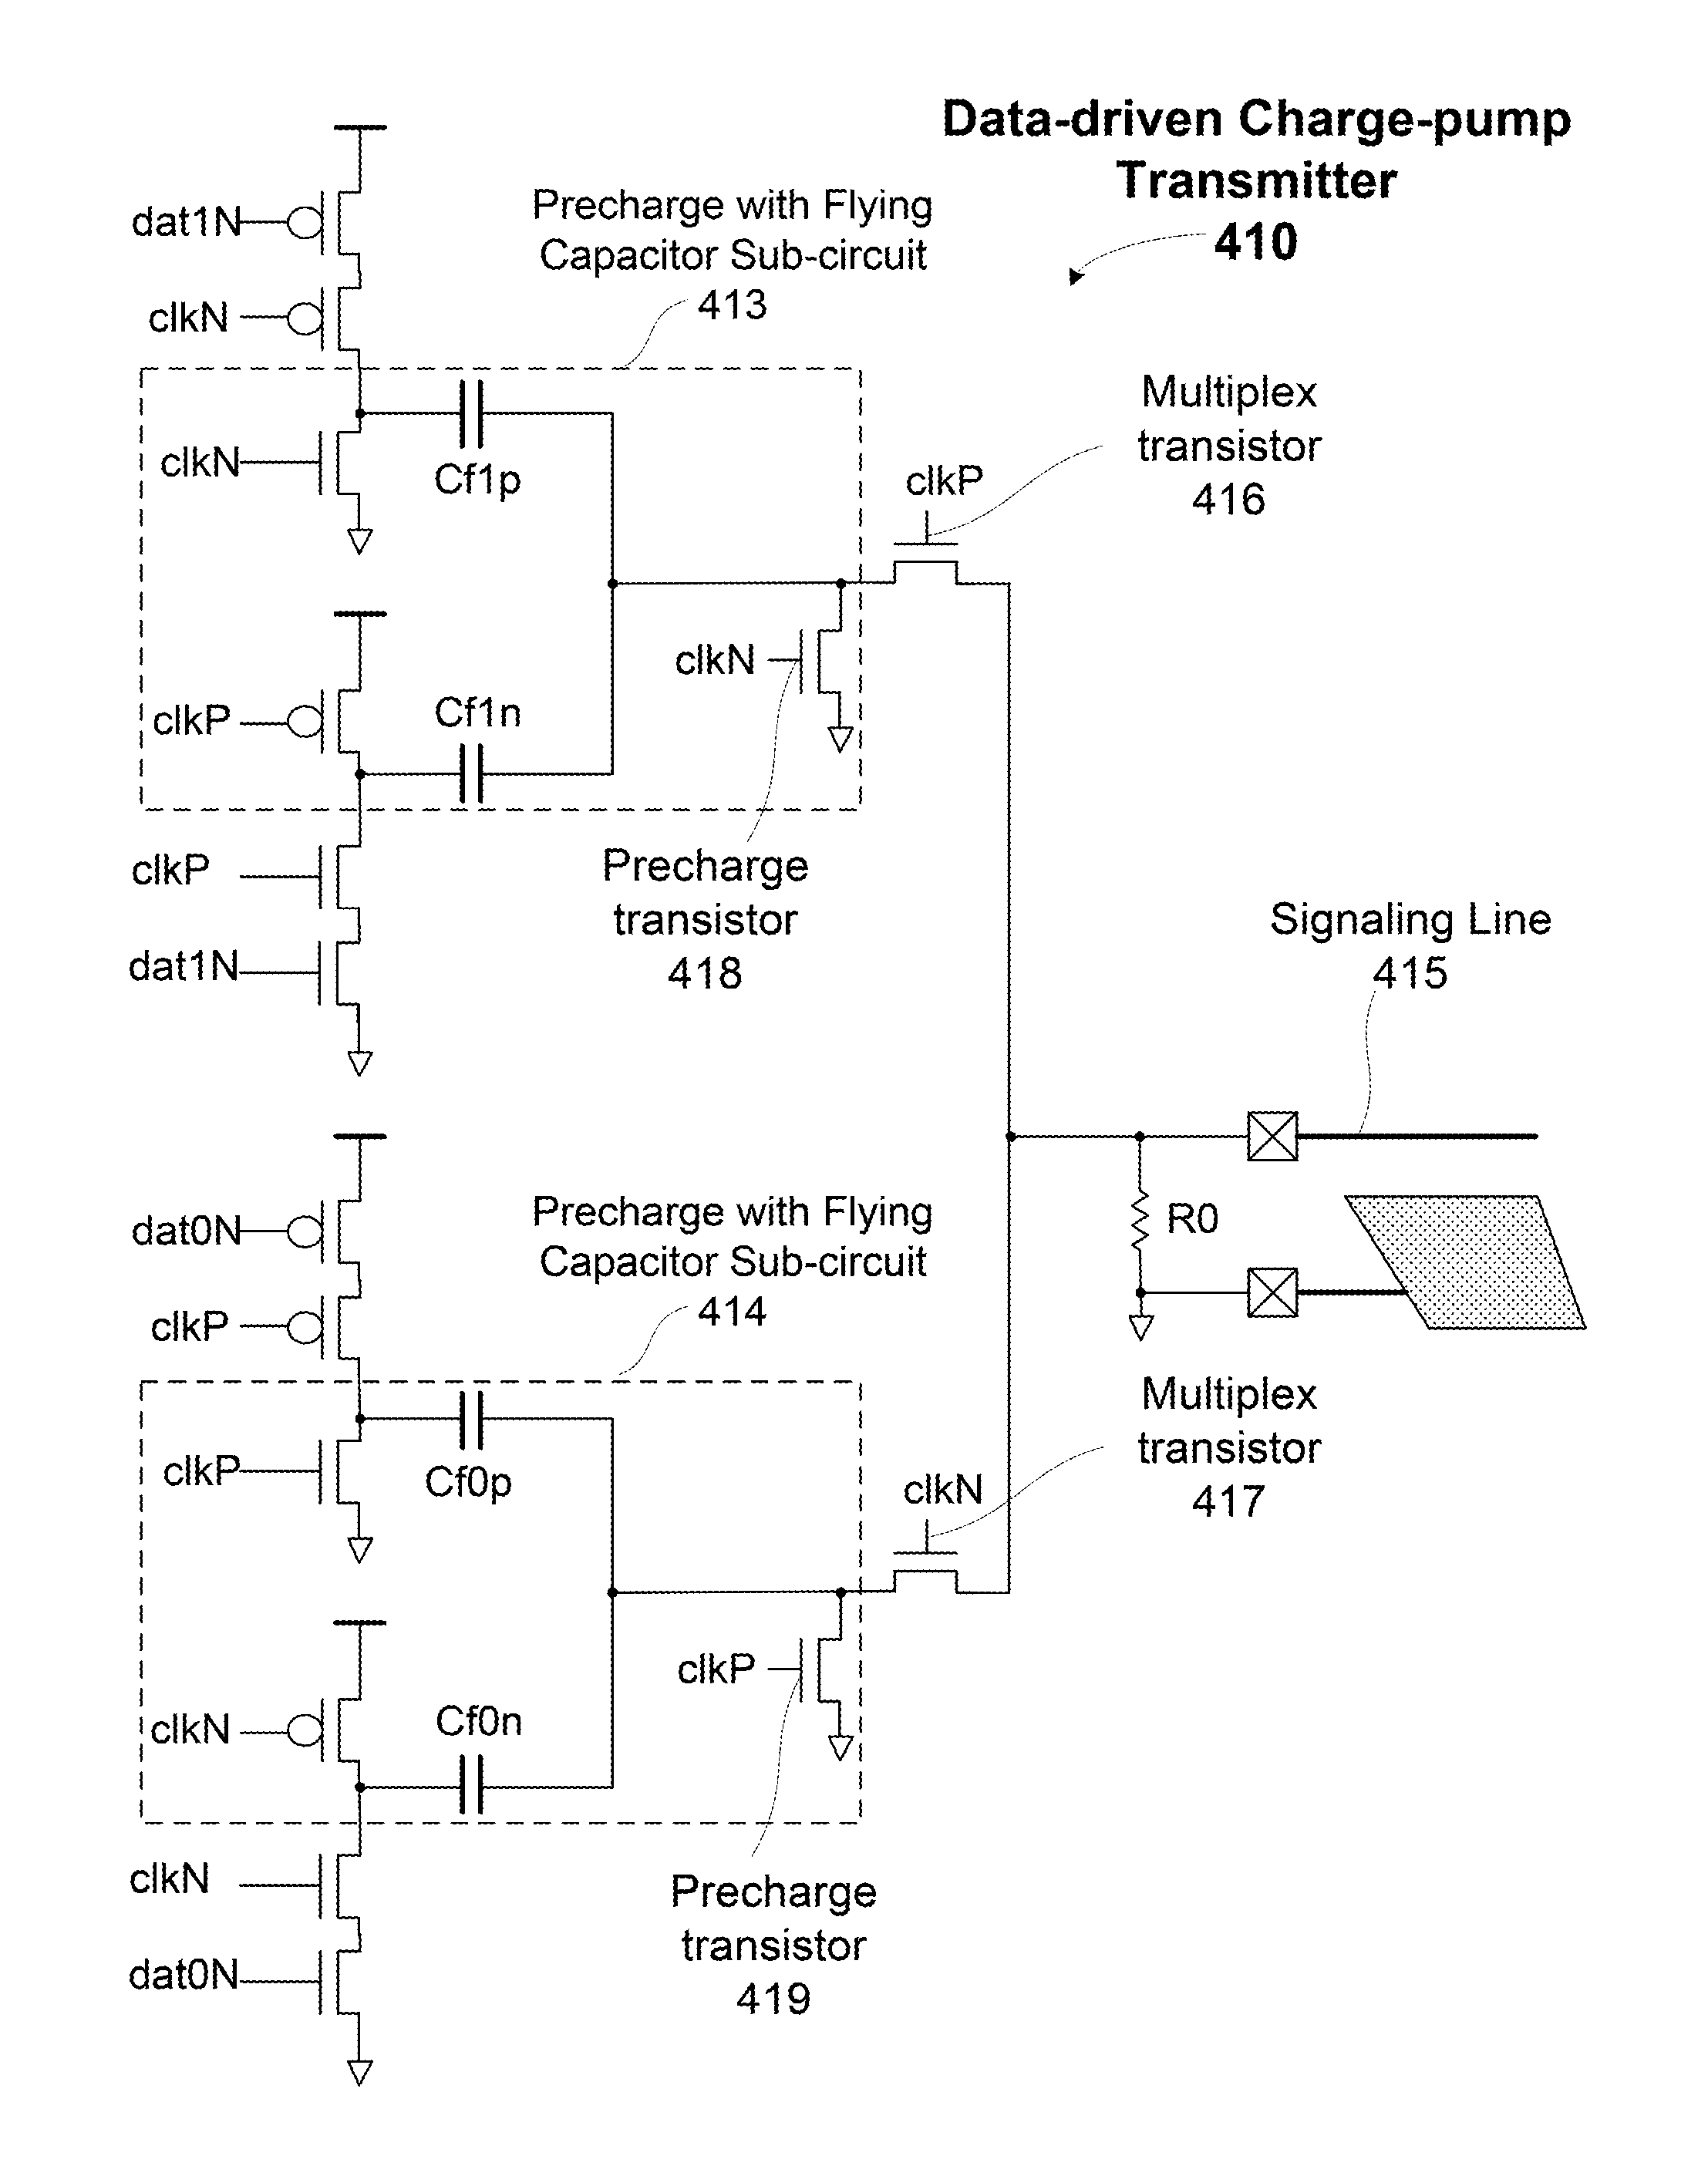 Ground referenced single-ended signaling